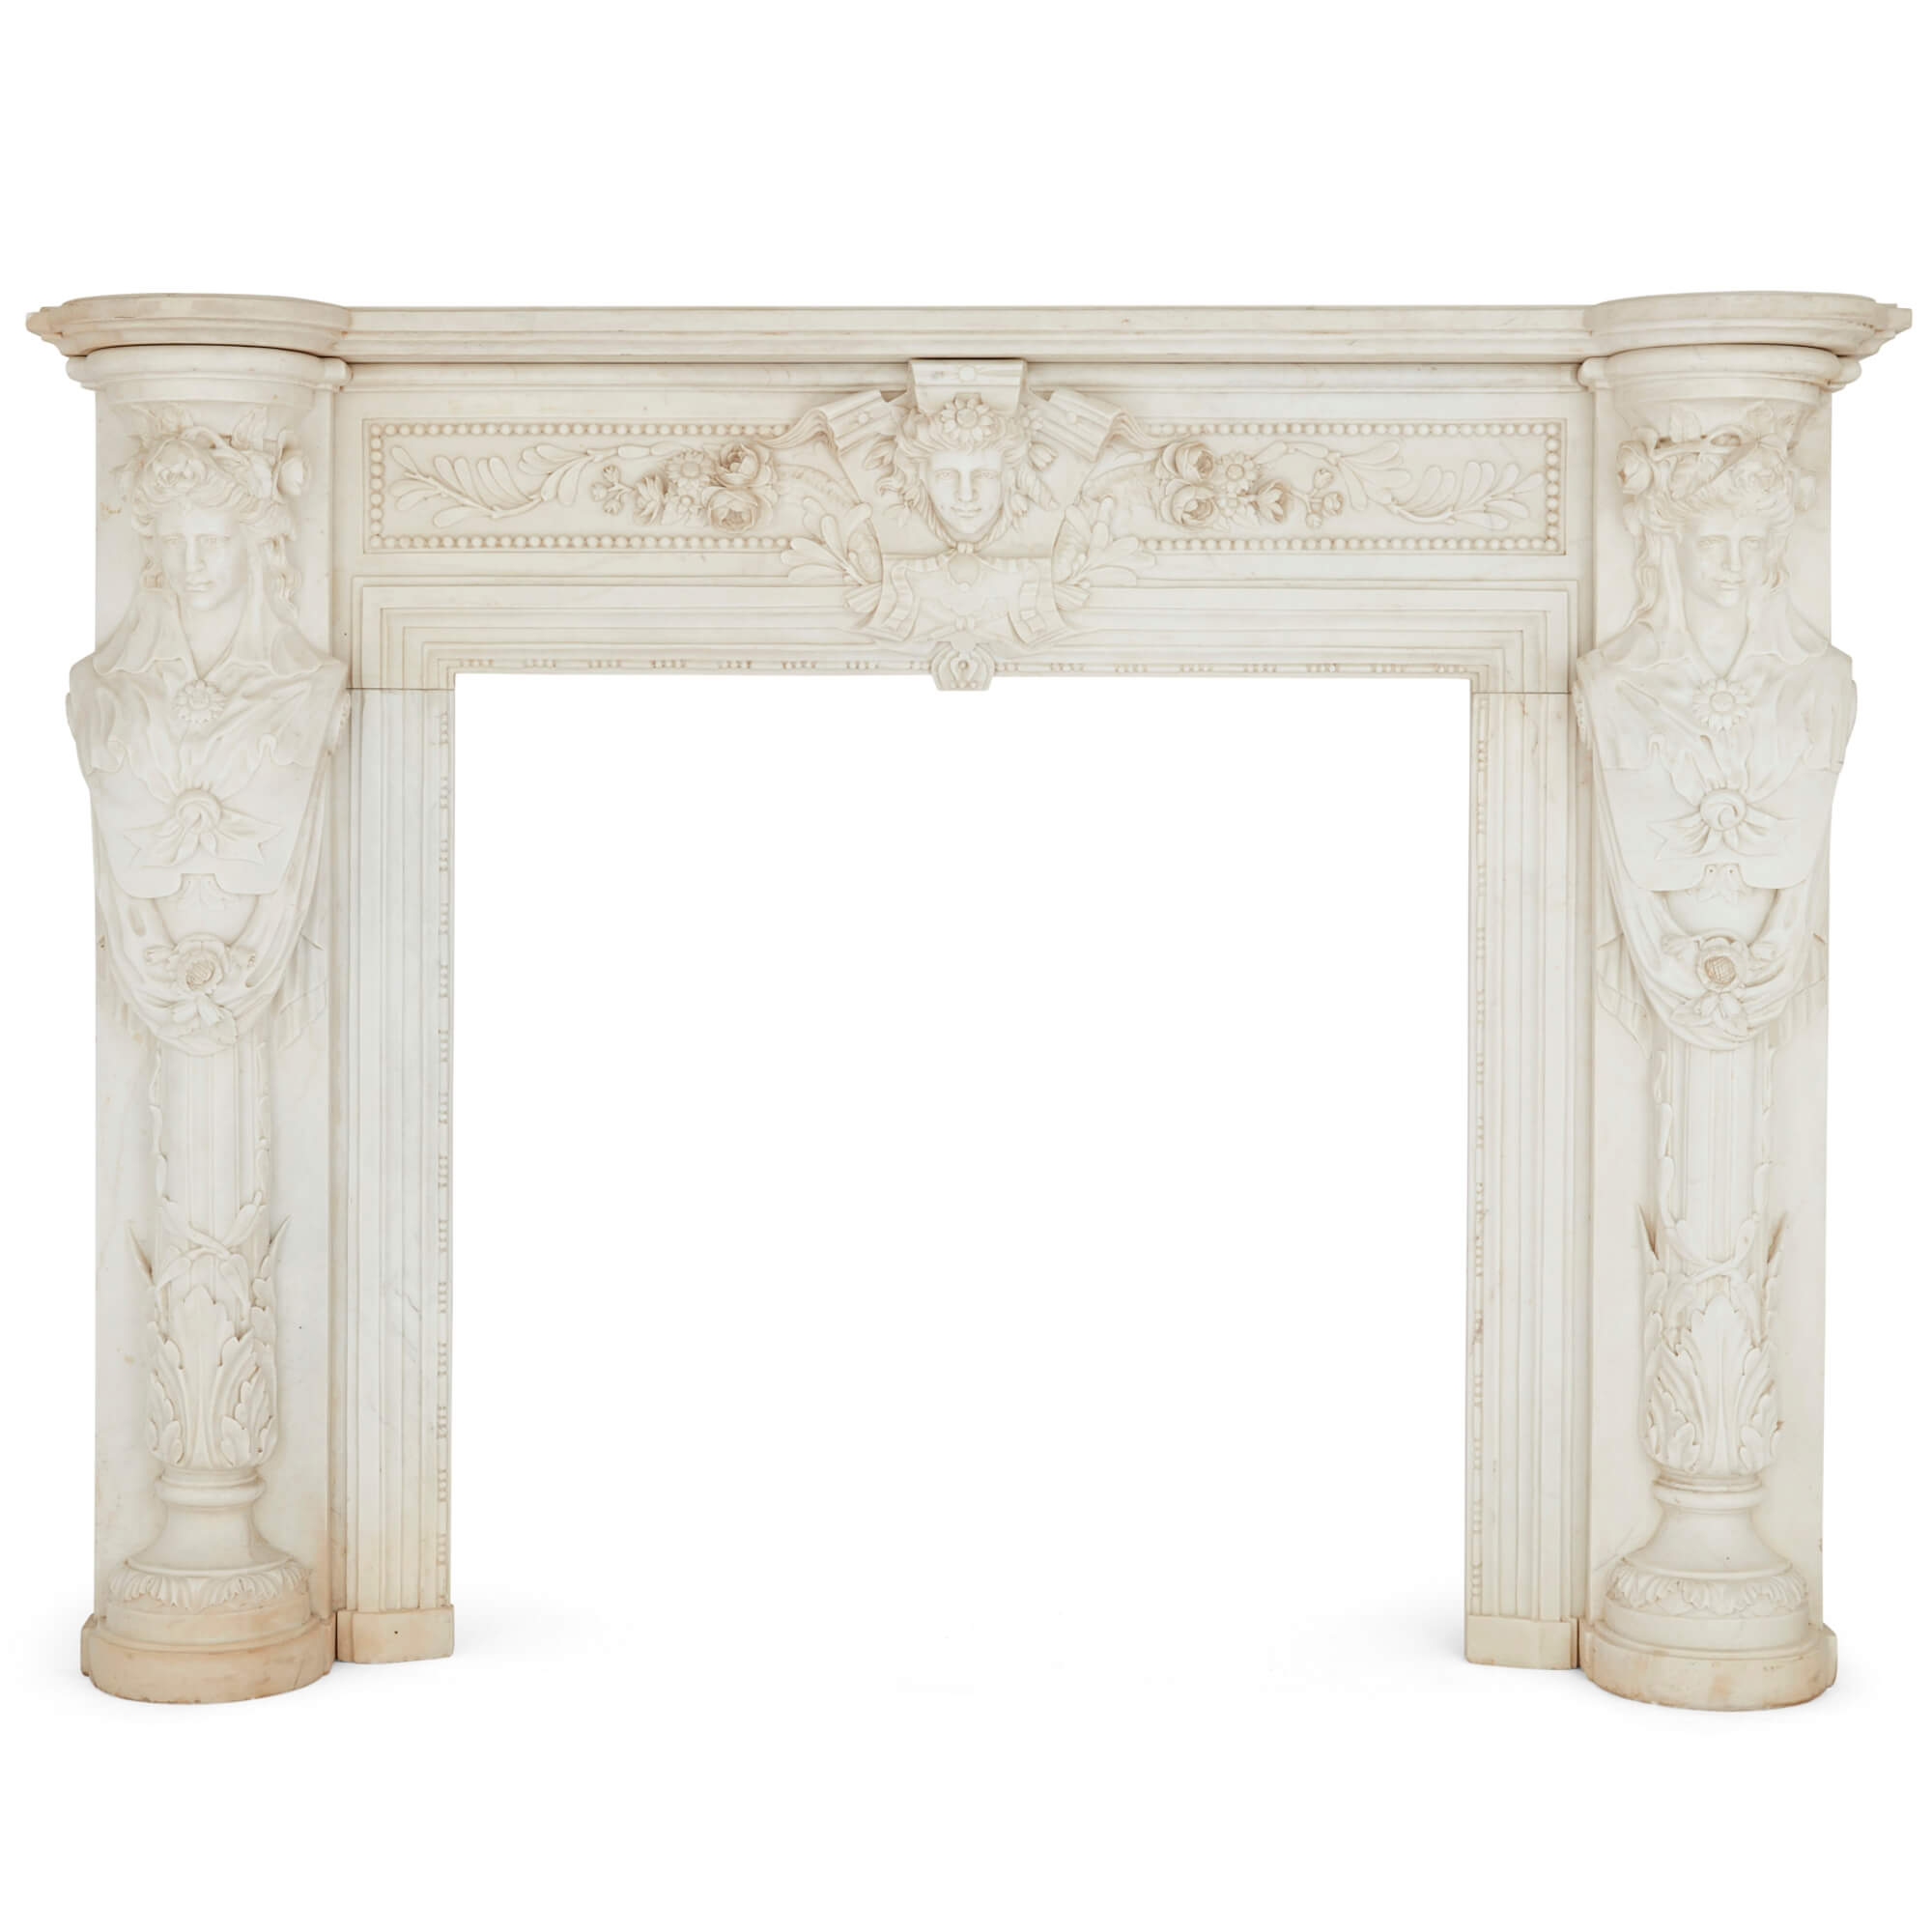 Antique Large White Marble Fireplace, French 19th Century For Sale